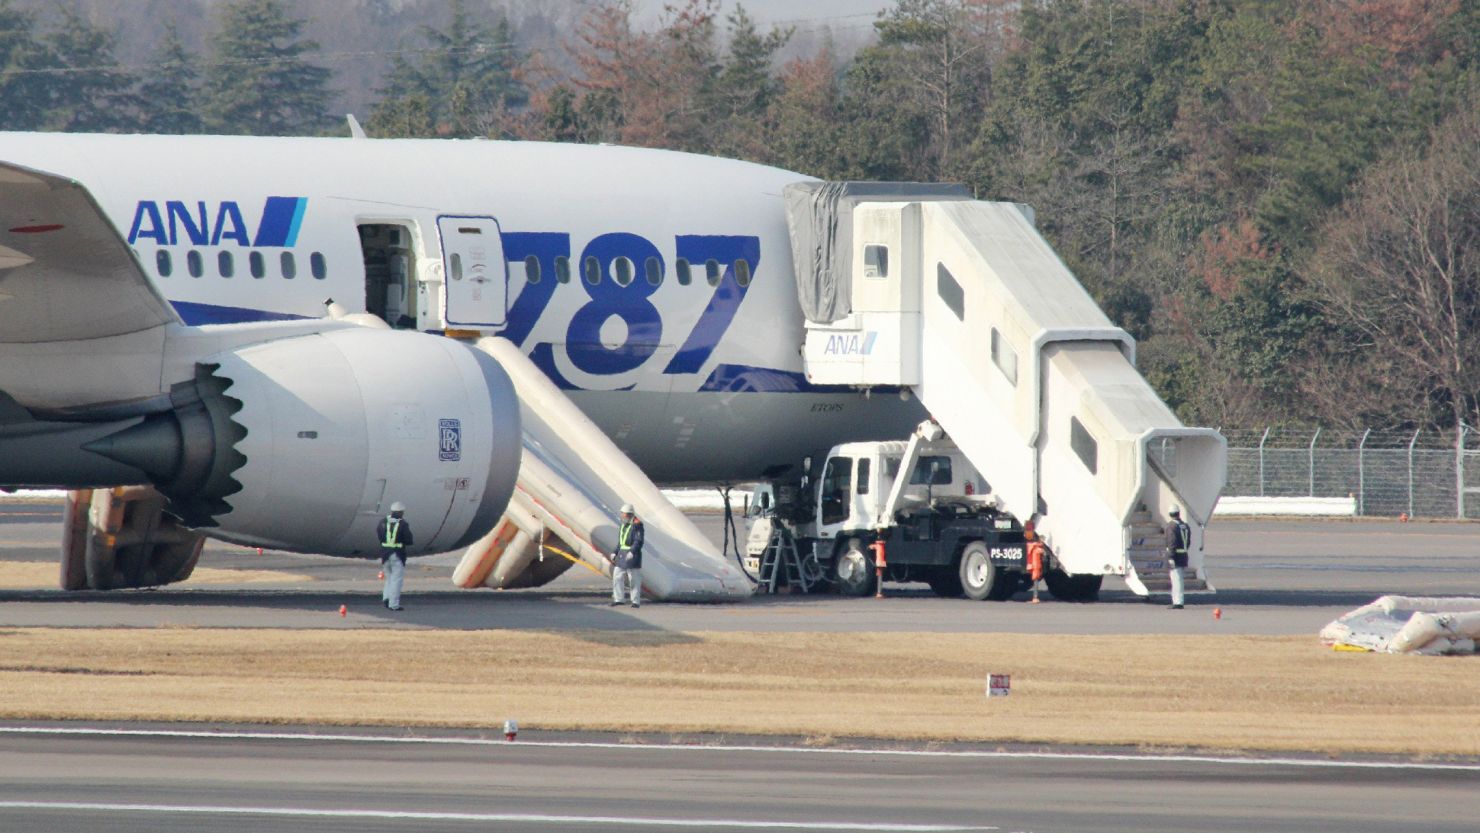 An ANA Dreamliner sits on the tarmac after an emergency landing at Takamatsu Airport in western Japan on January 16.